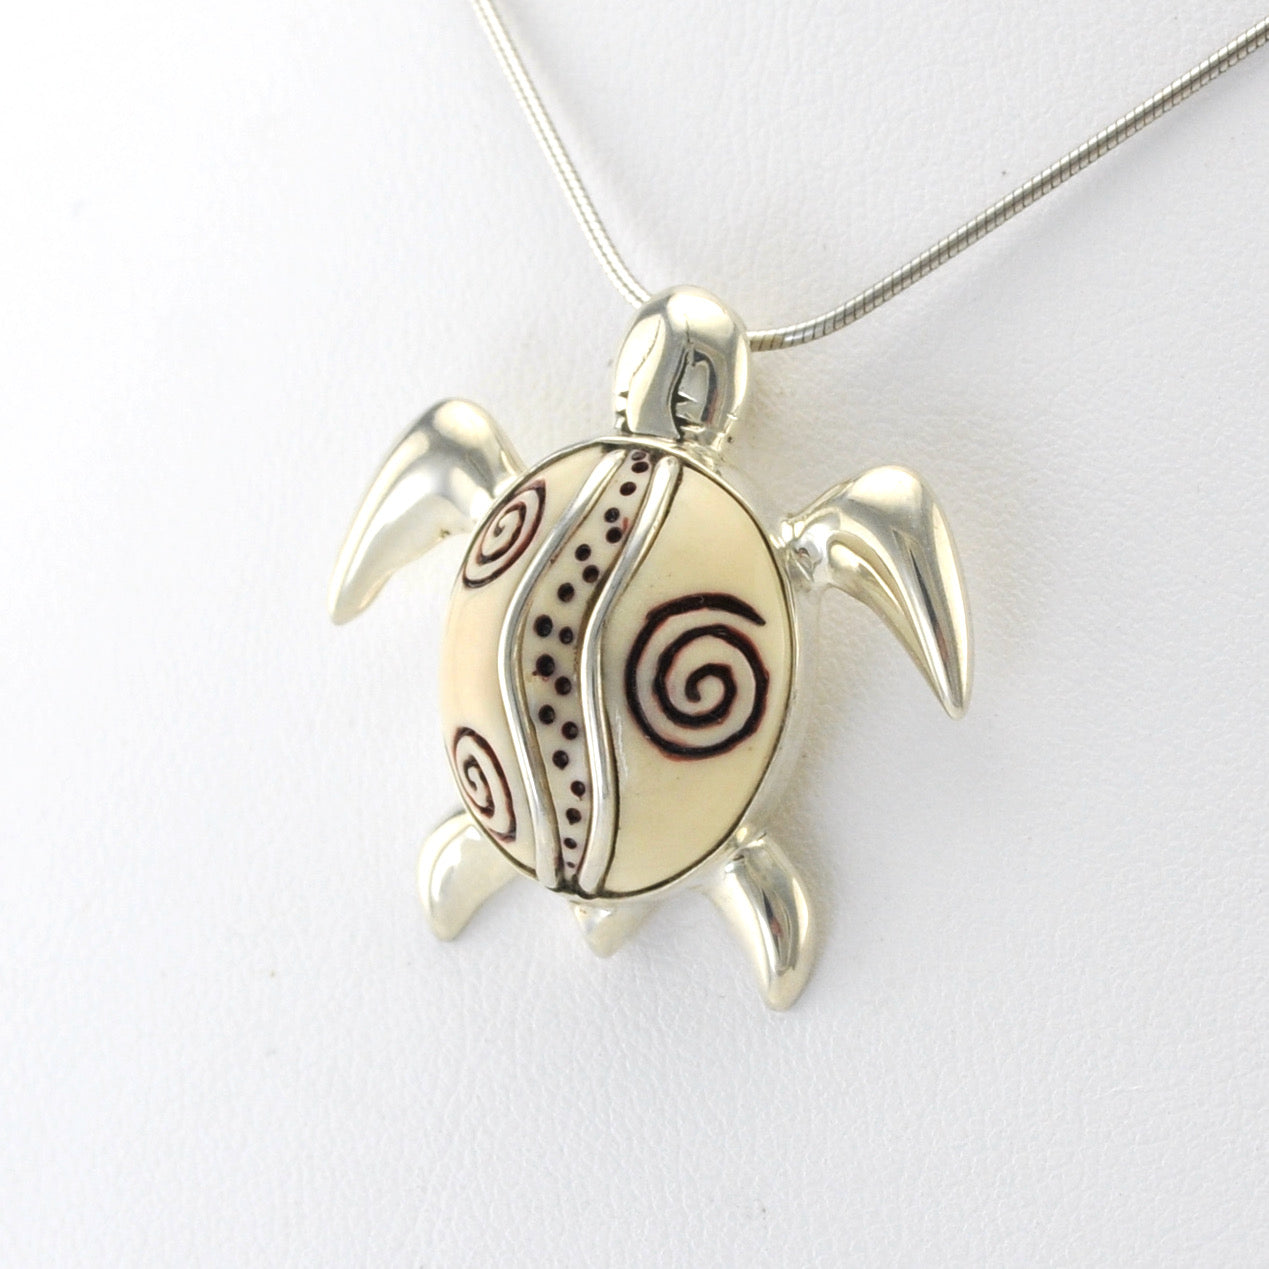 Fossilized Ivory with Sterling Silver Sea Turtle Pendant